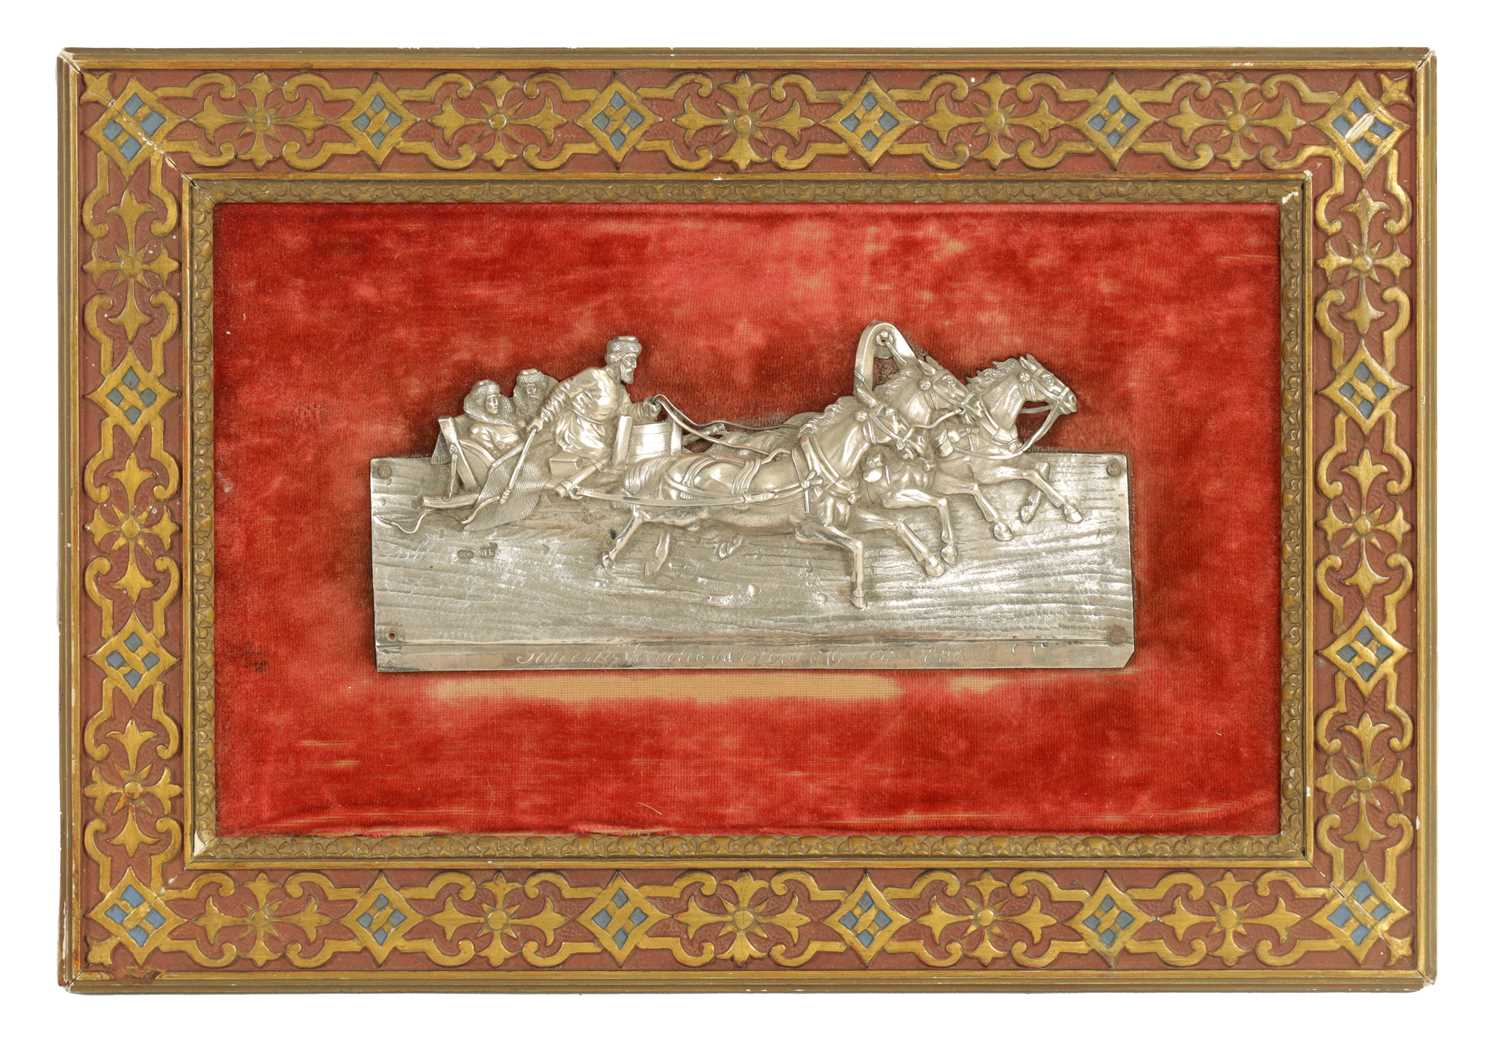 A LATE 19TH CENTURY RUSSIAN SILVER PLAQUE DEPICTING COSSACKS ON A SLAY PULLED BY HORSES - Image 2 of 14